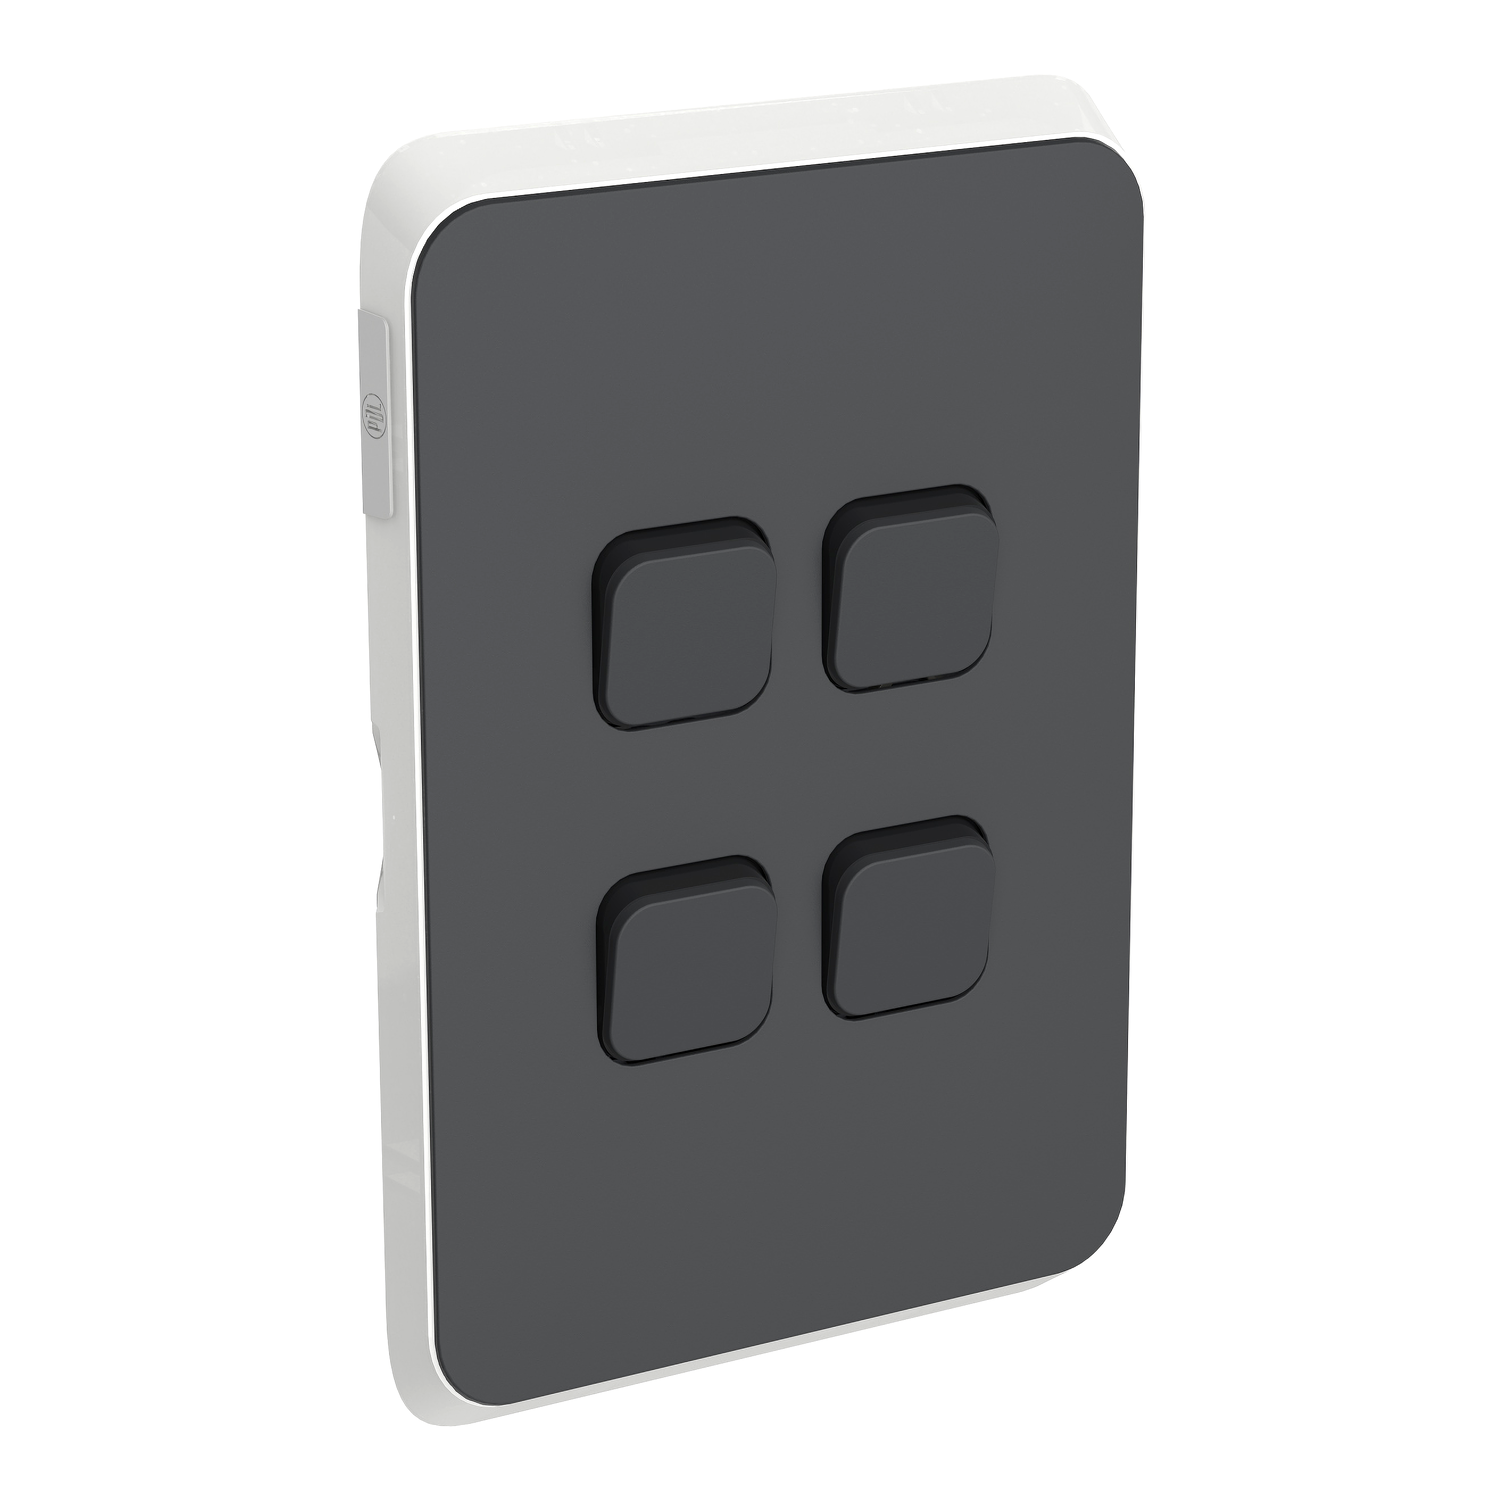 PDL Iconic - Cover Plate Switch 4-Gang - Anthracite